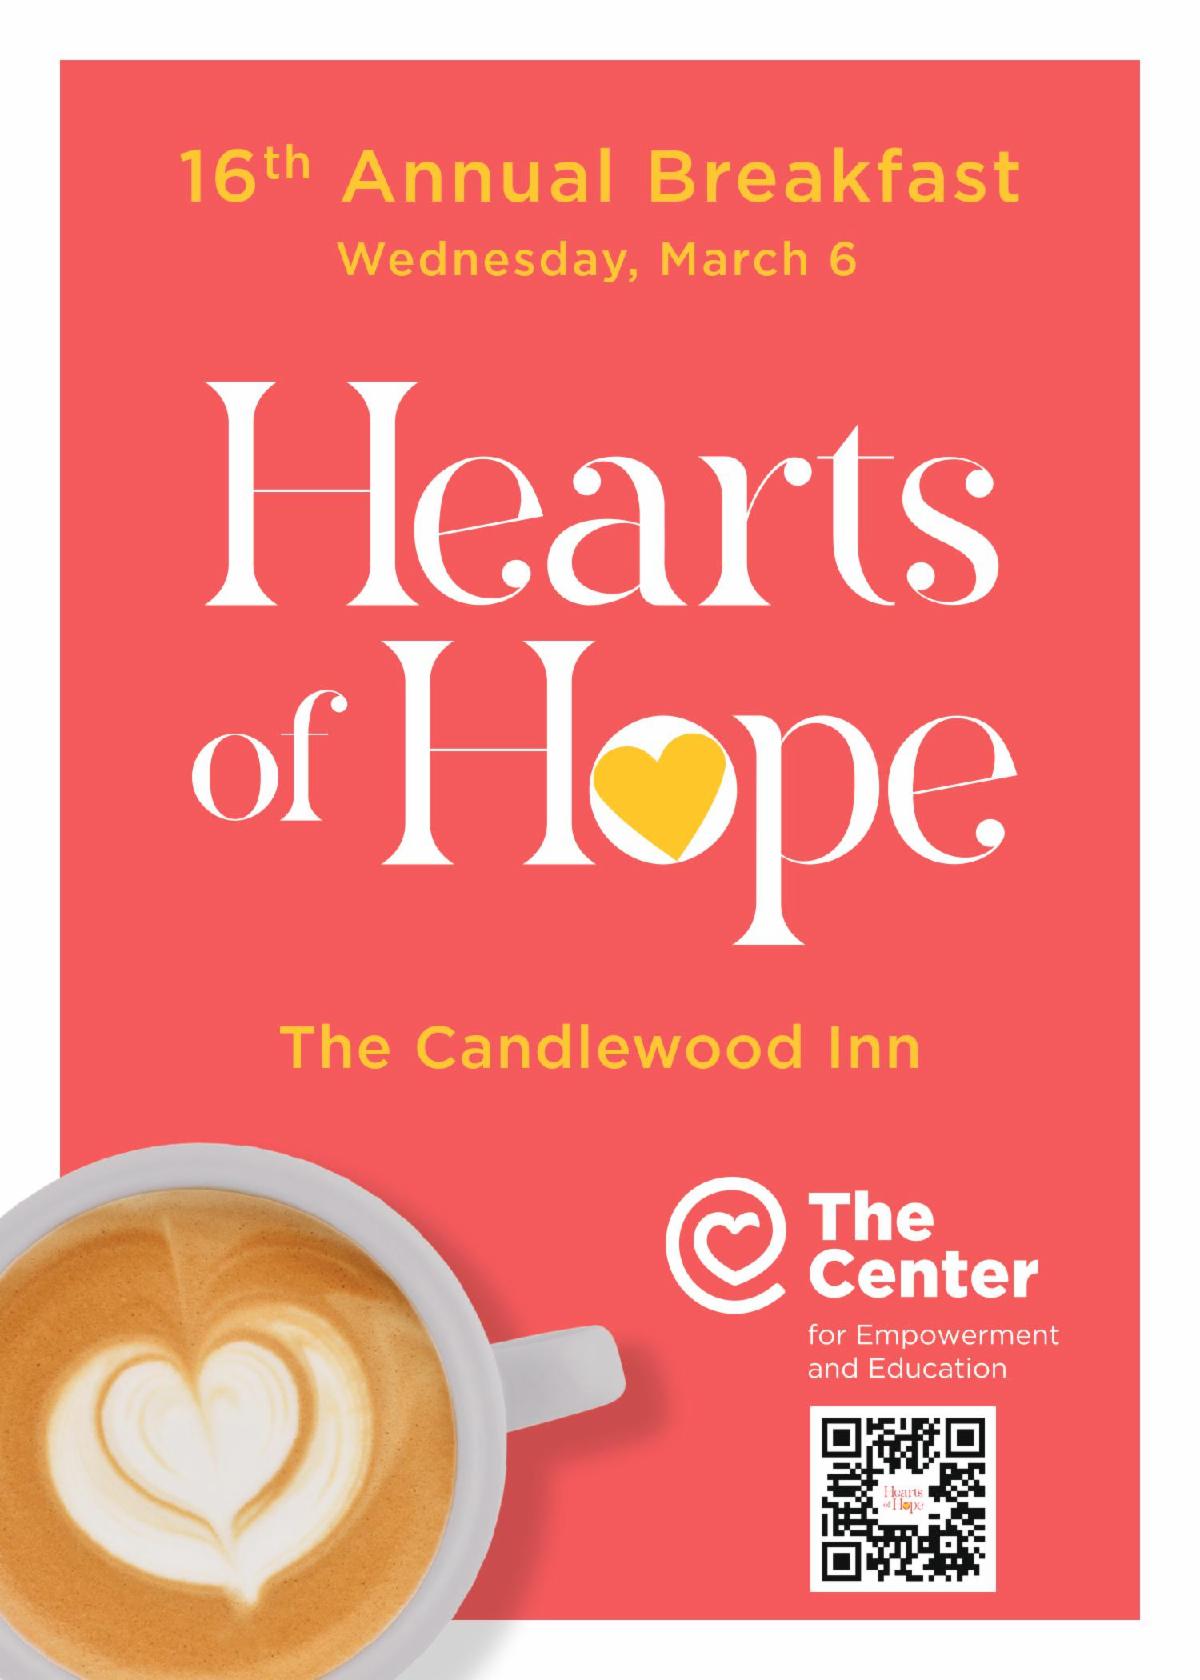 Hearts of Hope Breakfast The Center